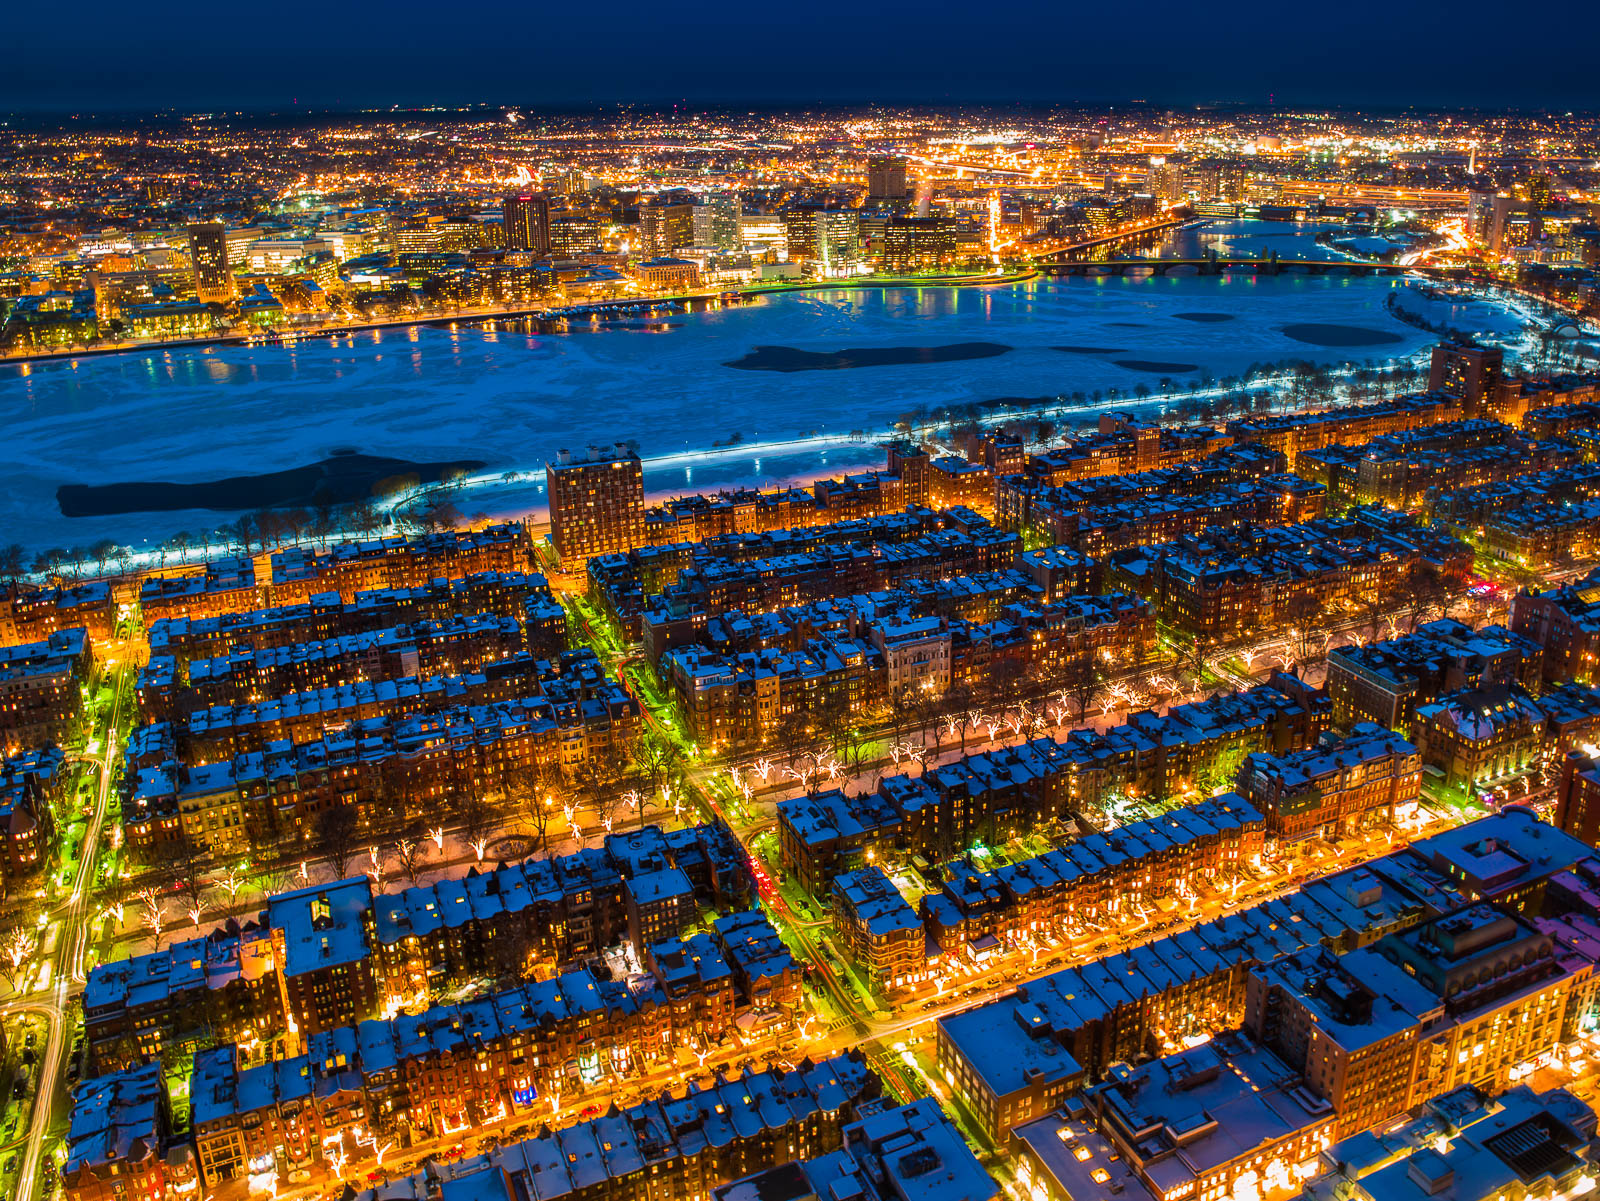 Snow capped brownstones and vibrant Christmas lights highlight the Charles River on this cold night.